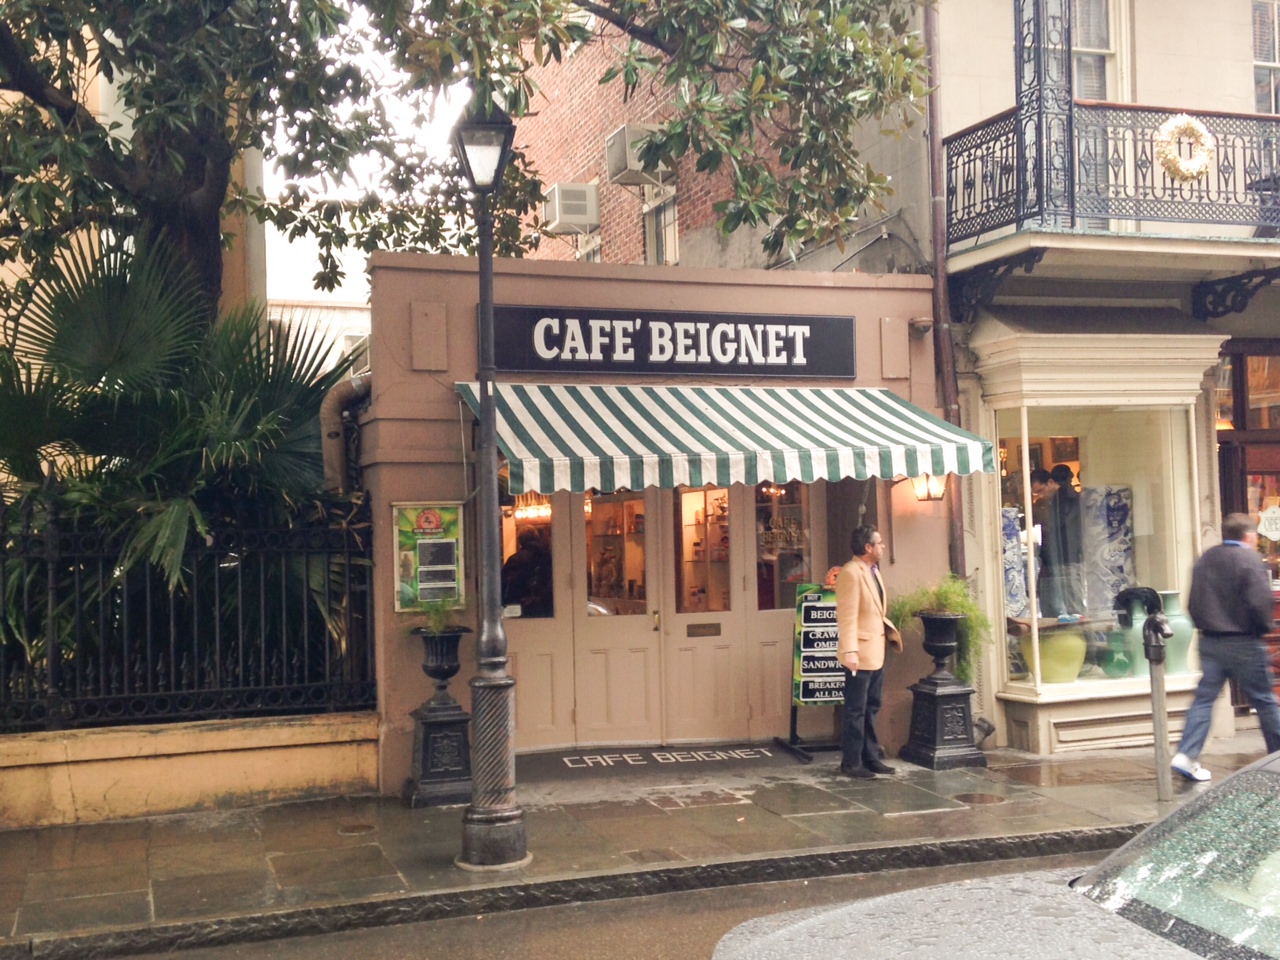 Cafe Beignet - the one on Royal Street.